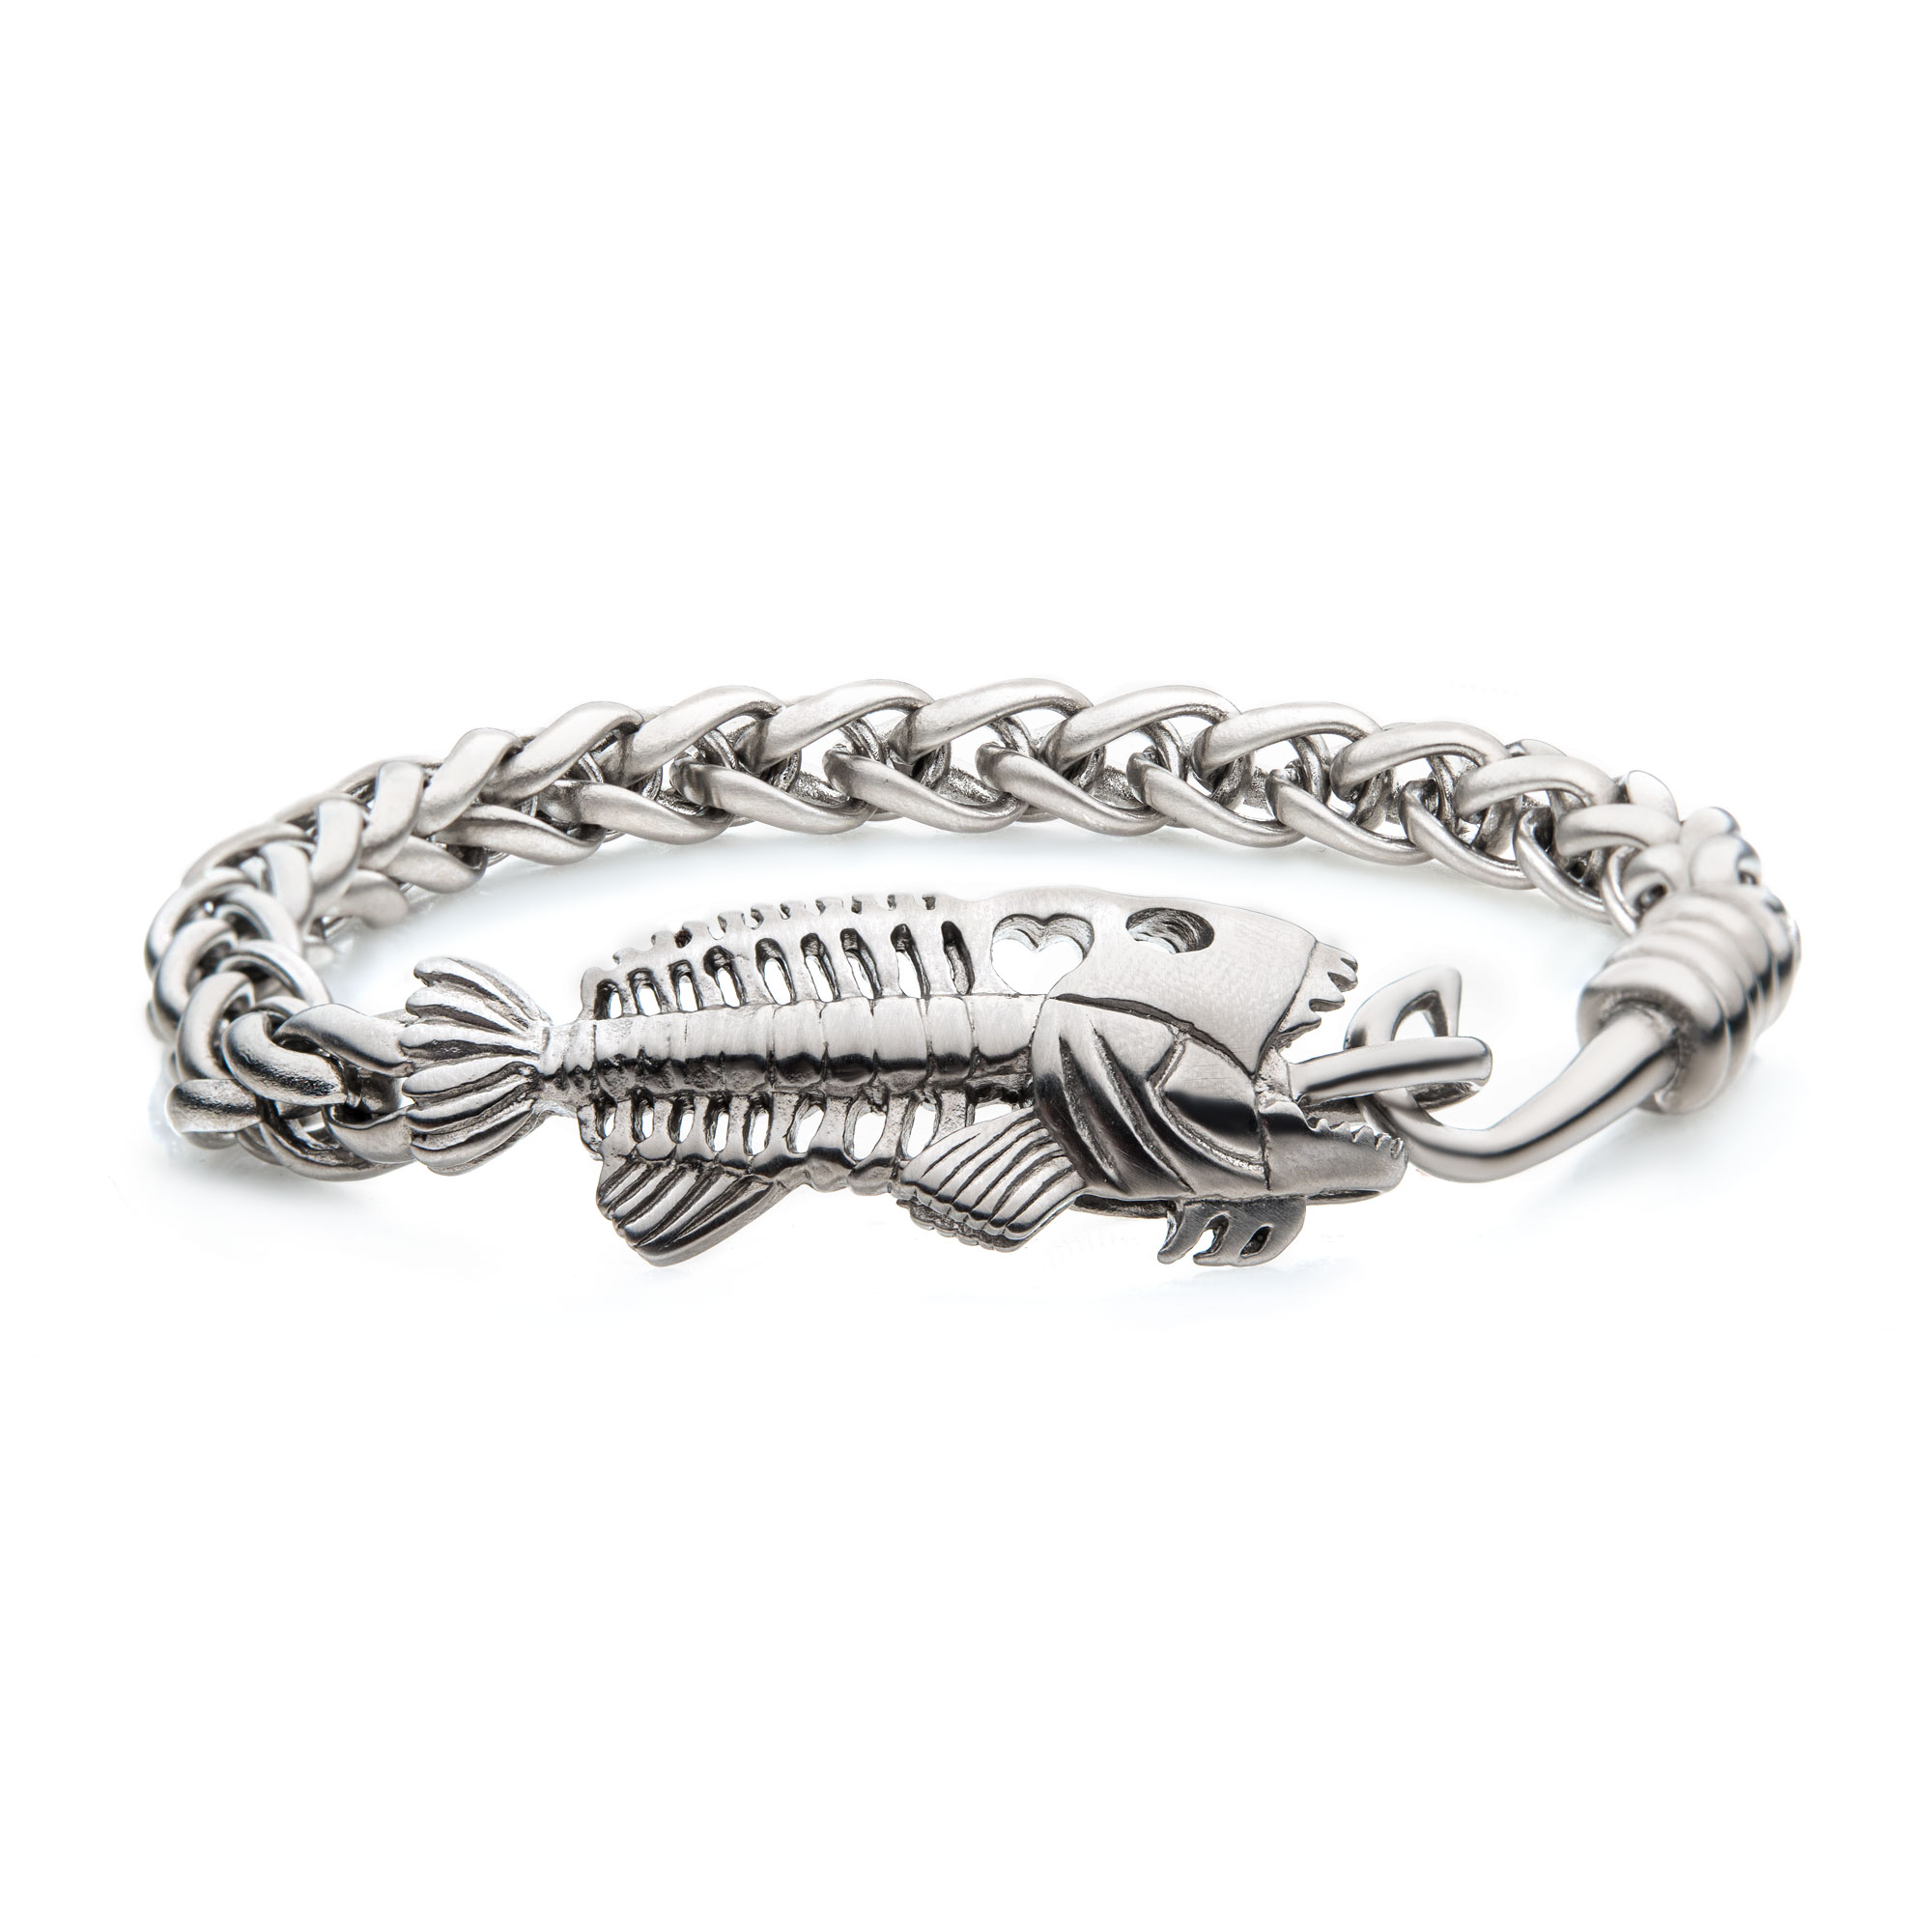 Polished Steel Wheat Chain with Fishbone on Hook Clasp Bracelet Lewis Jewelers, Inc. Ansonia, CT